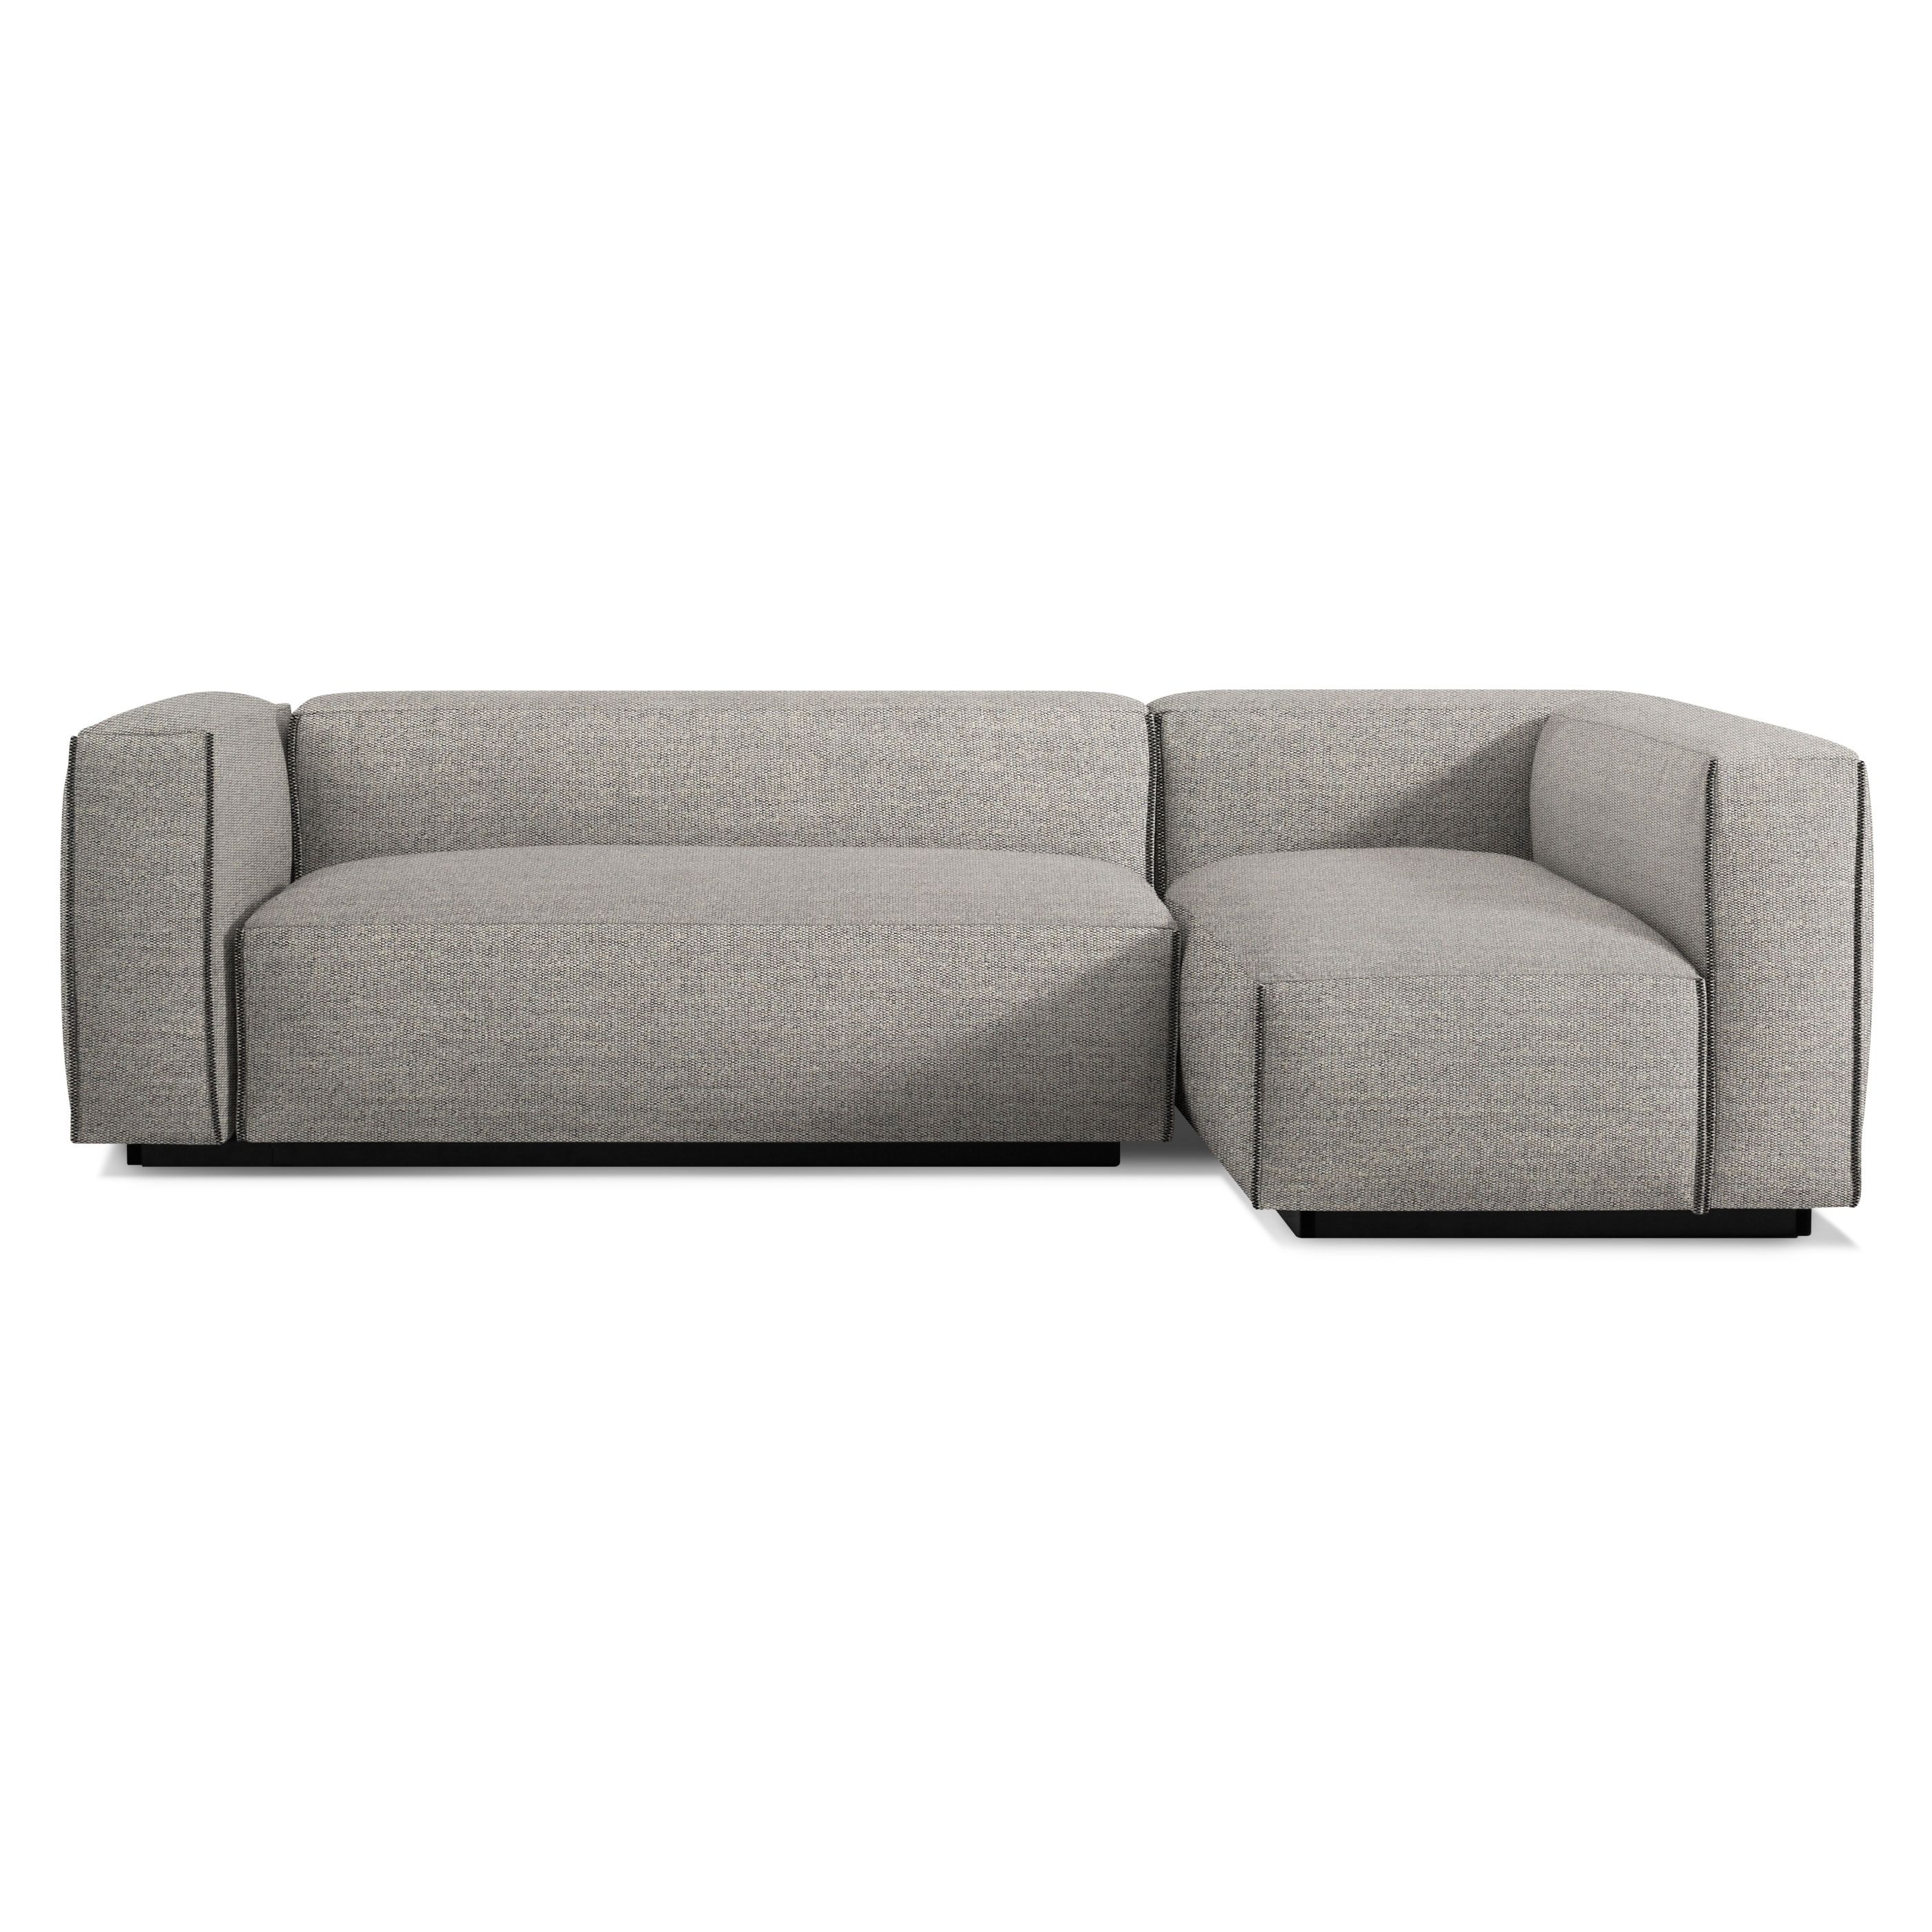 Cleon Small Modern Sectional Sofa | Blu Dot With Small Sectional Sofas (Photo 1 of 10)